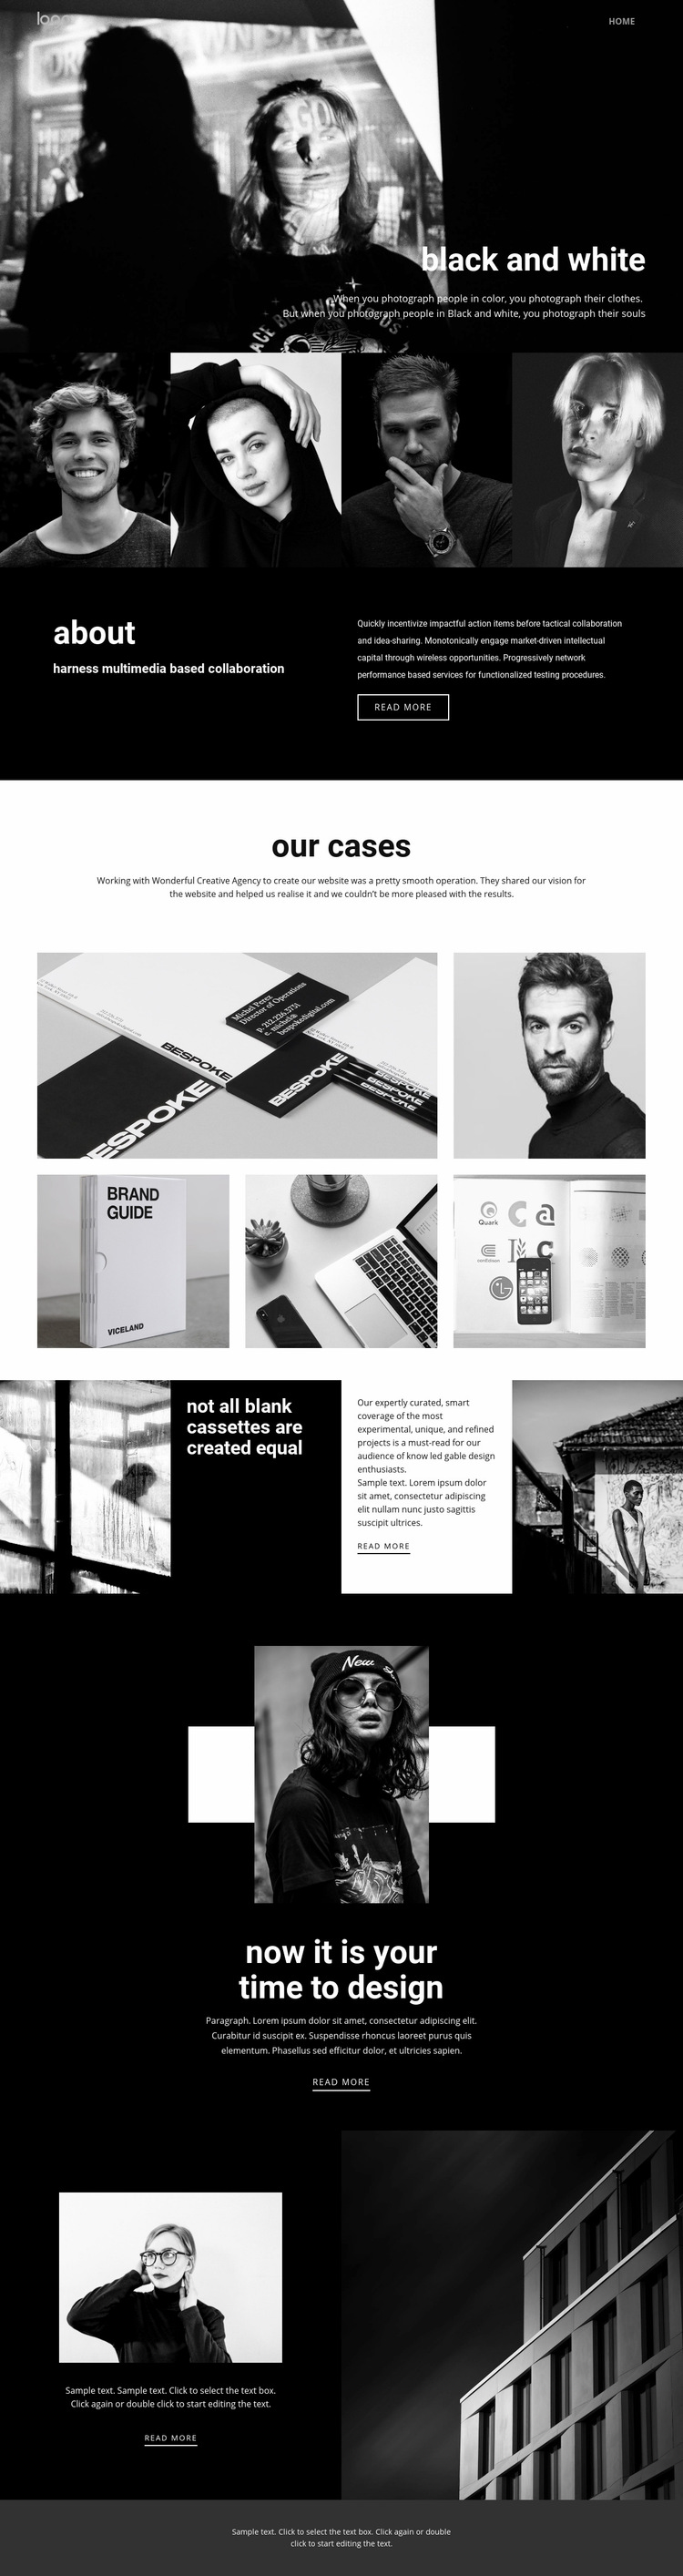 Black and white colors of art Web Page Design